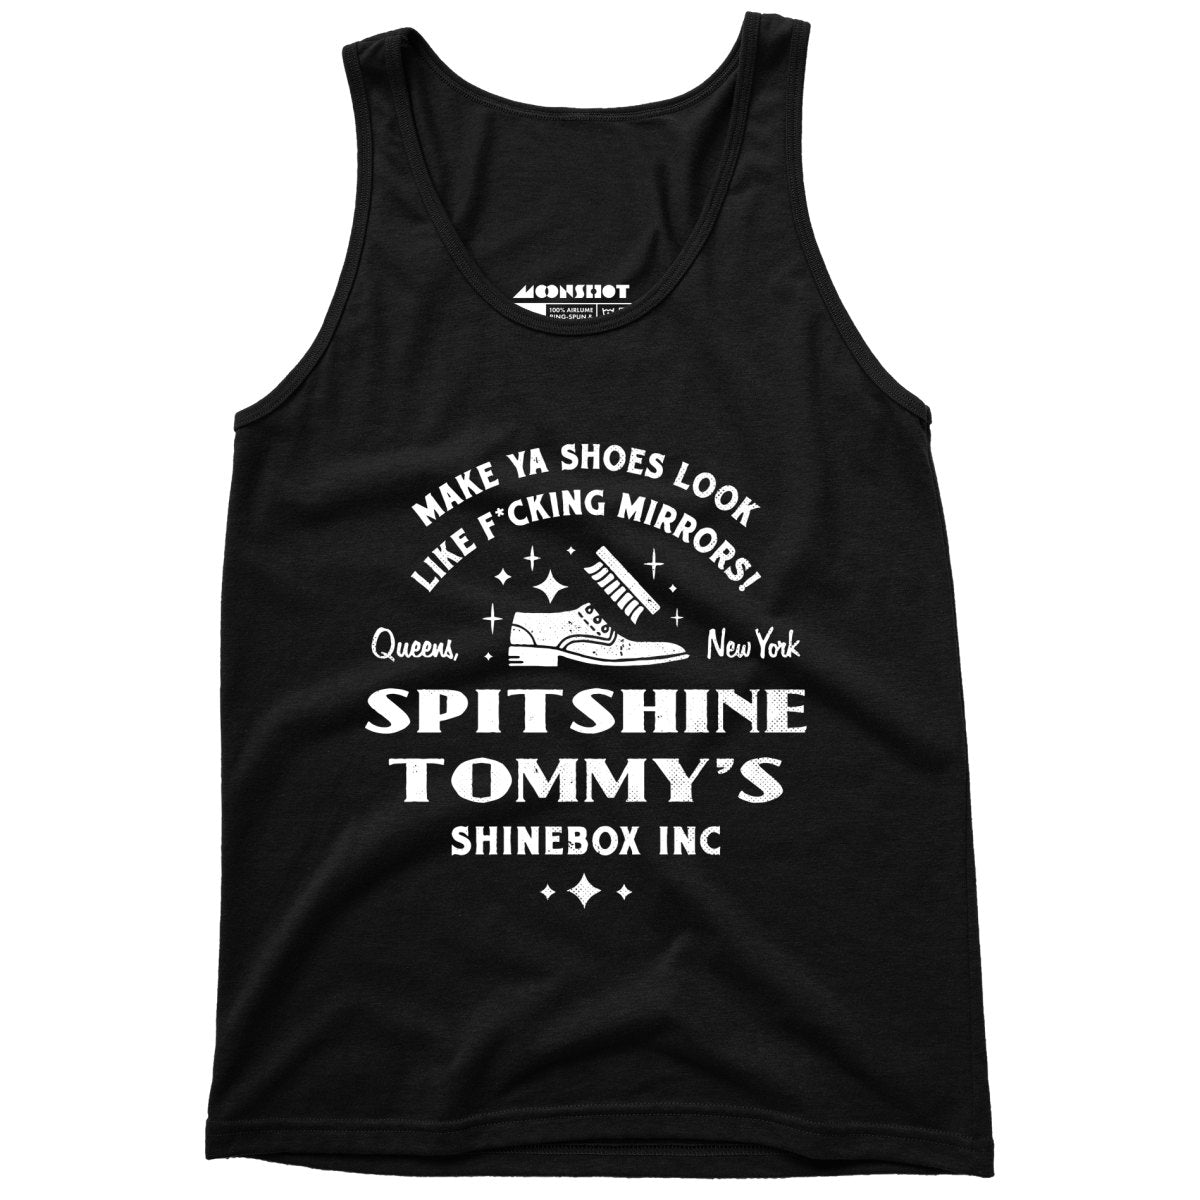 Spitshine Tommy's Shinebox Inc. - Unisex Tank Top